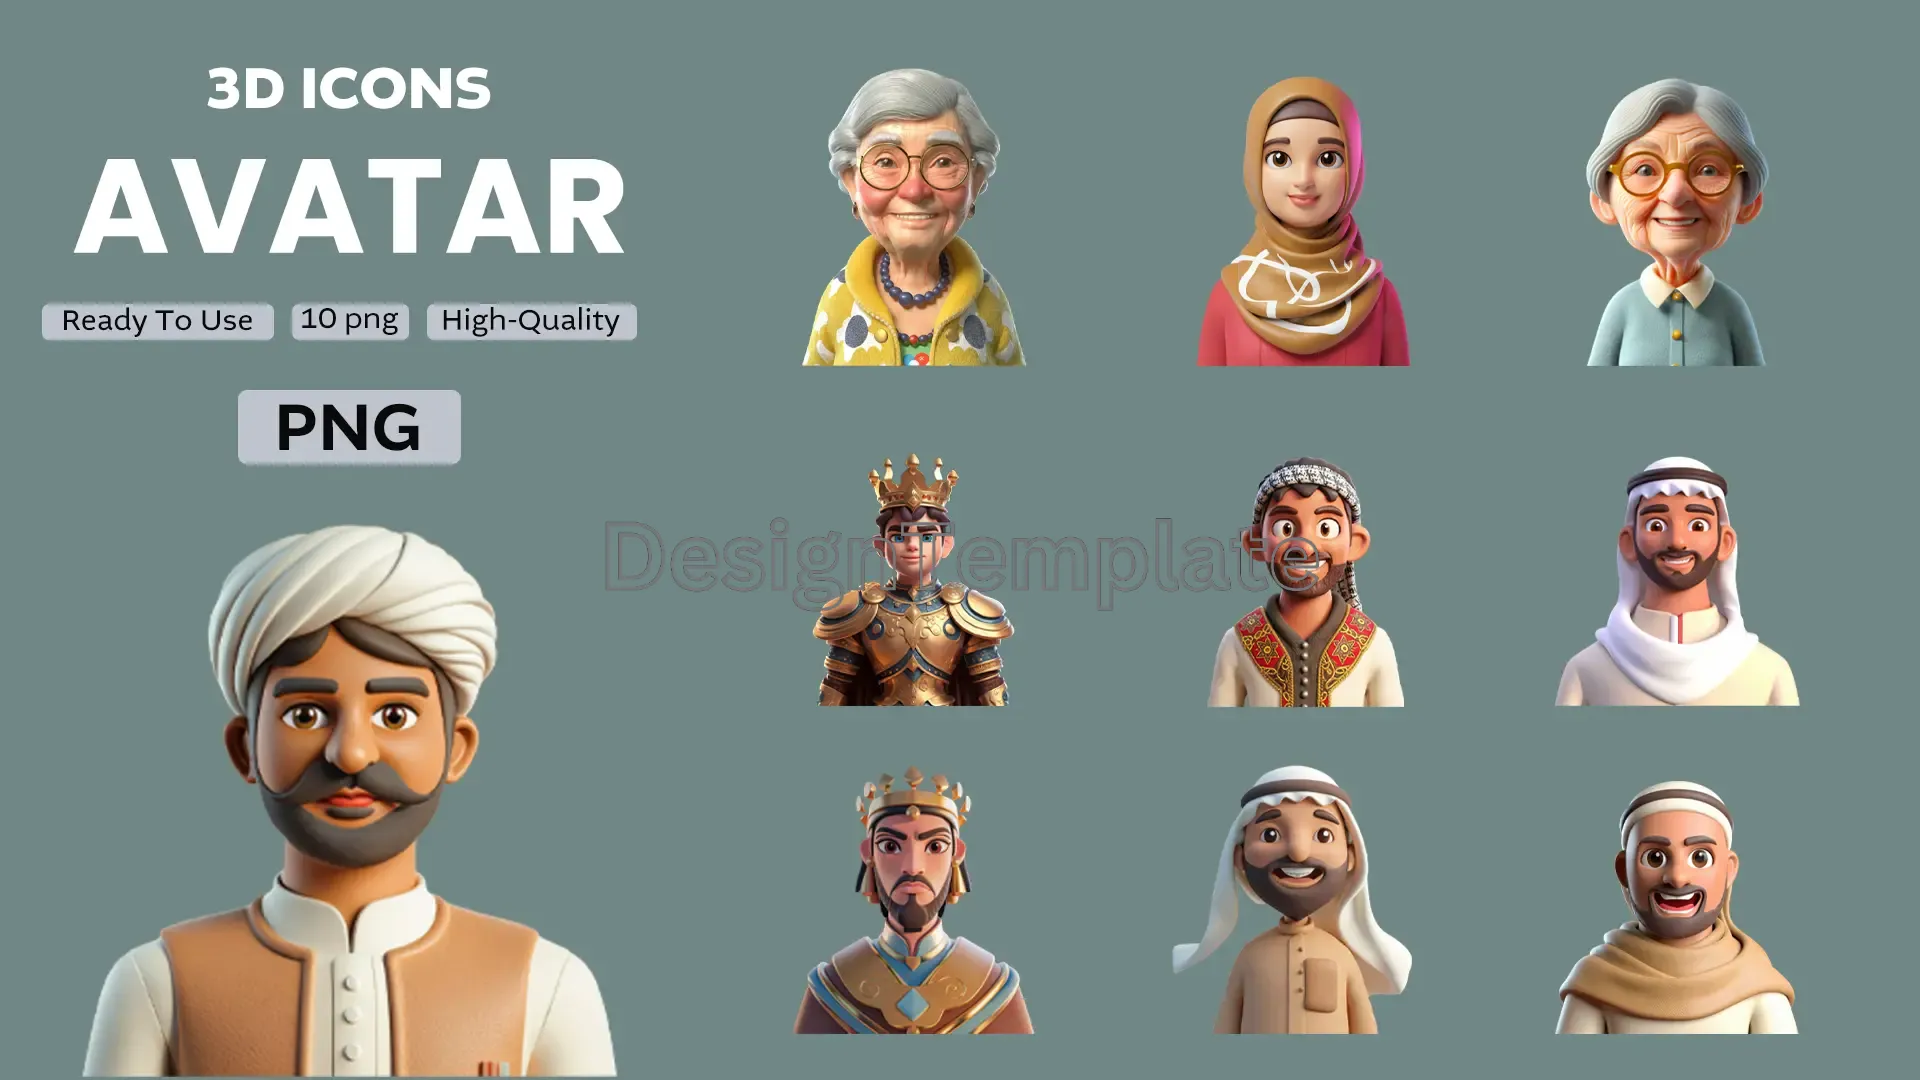 Multicultural 3D Avatar Icons Collection image